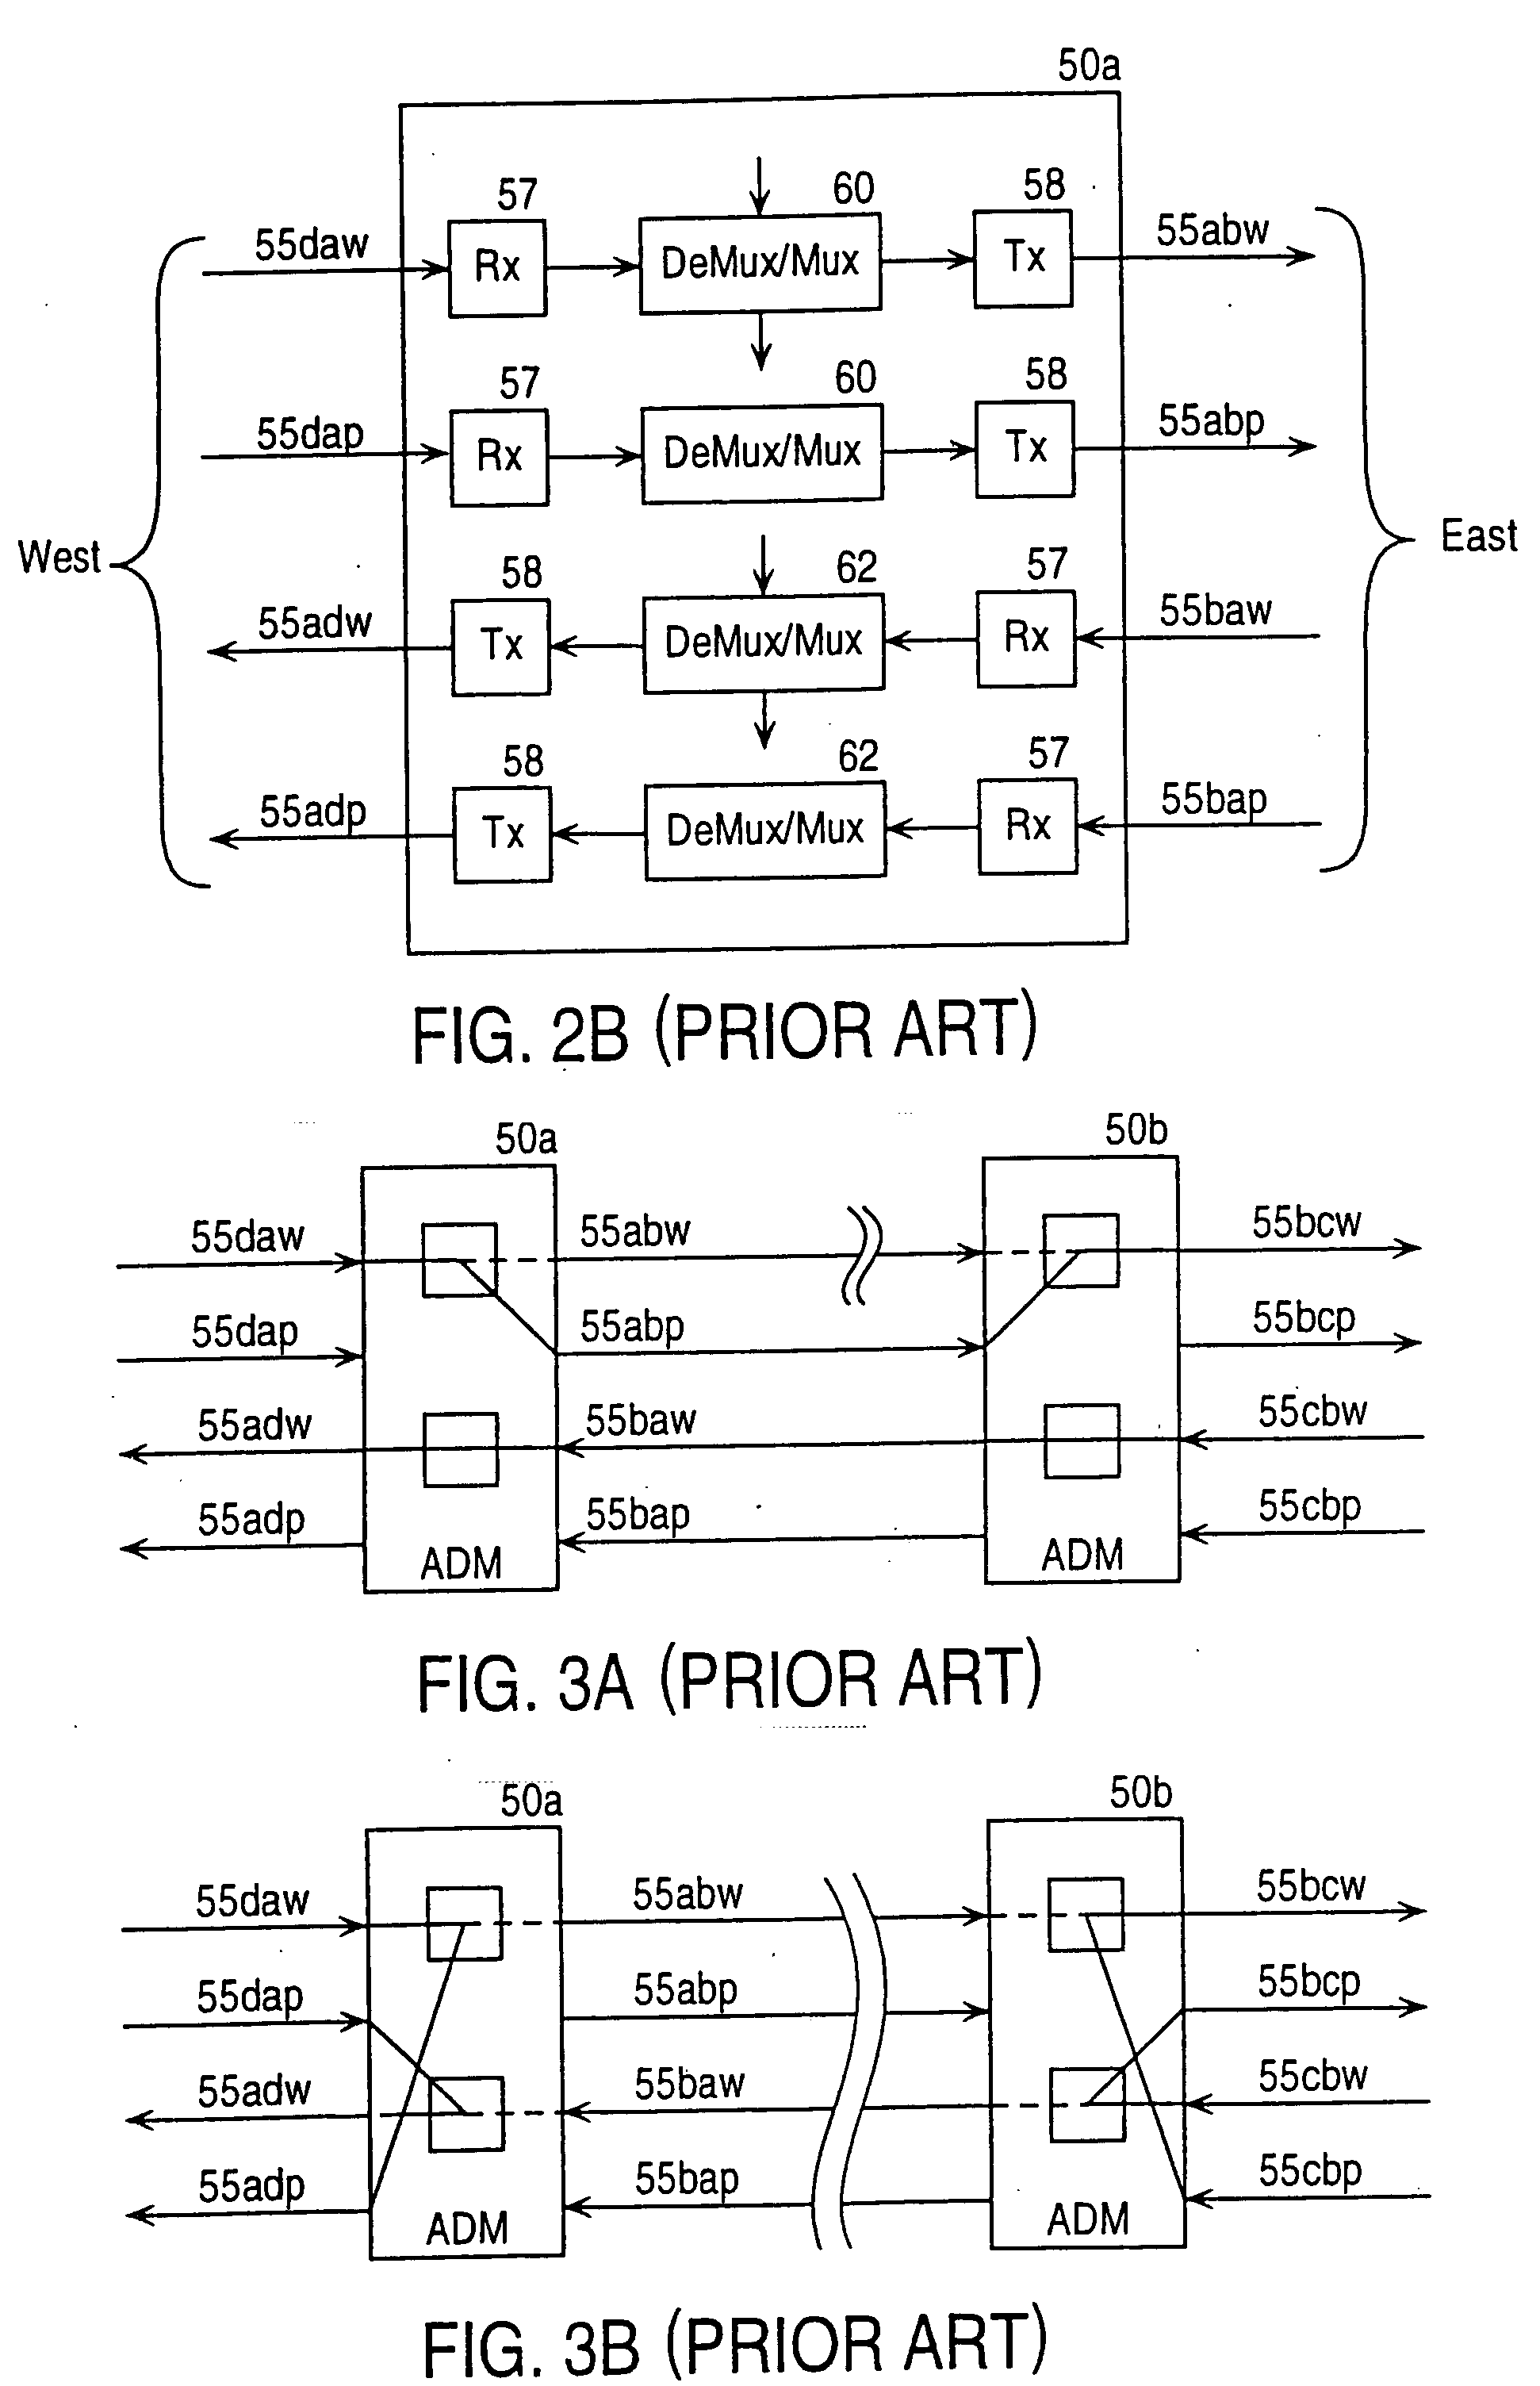 Method and apparatus for operation, protection, and restoration of heterogeneous optical communication networks